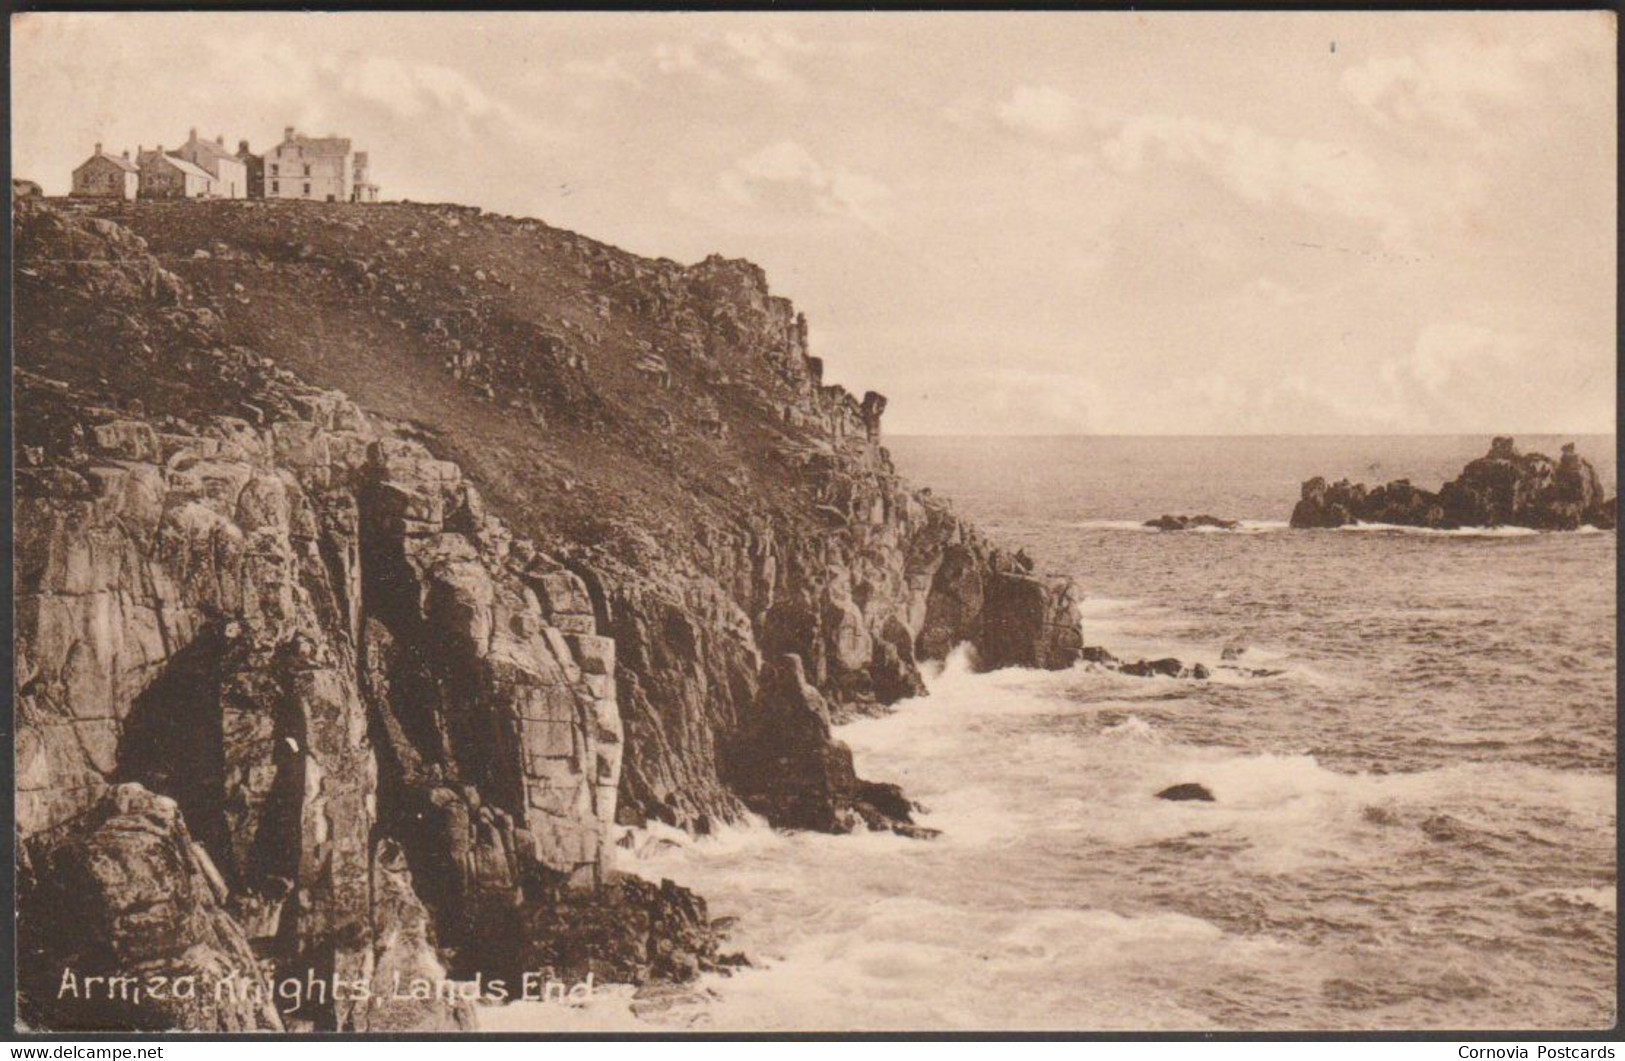 Armed Knights, Land's End, Cornwall, 1924 - R Williams Postcard - Land's End